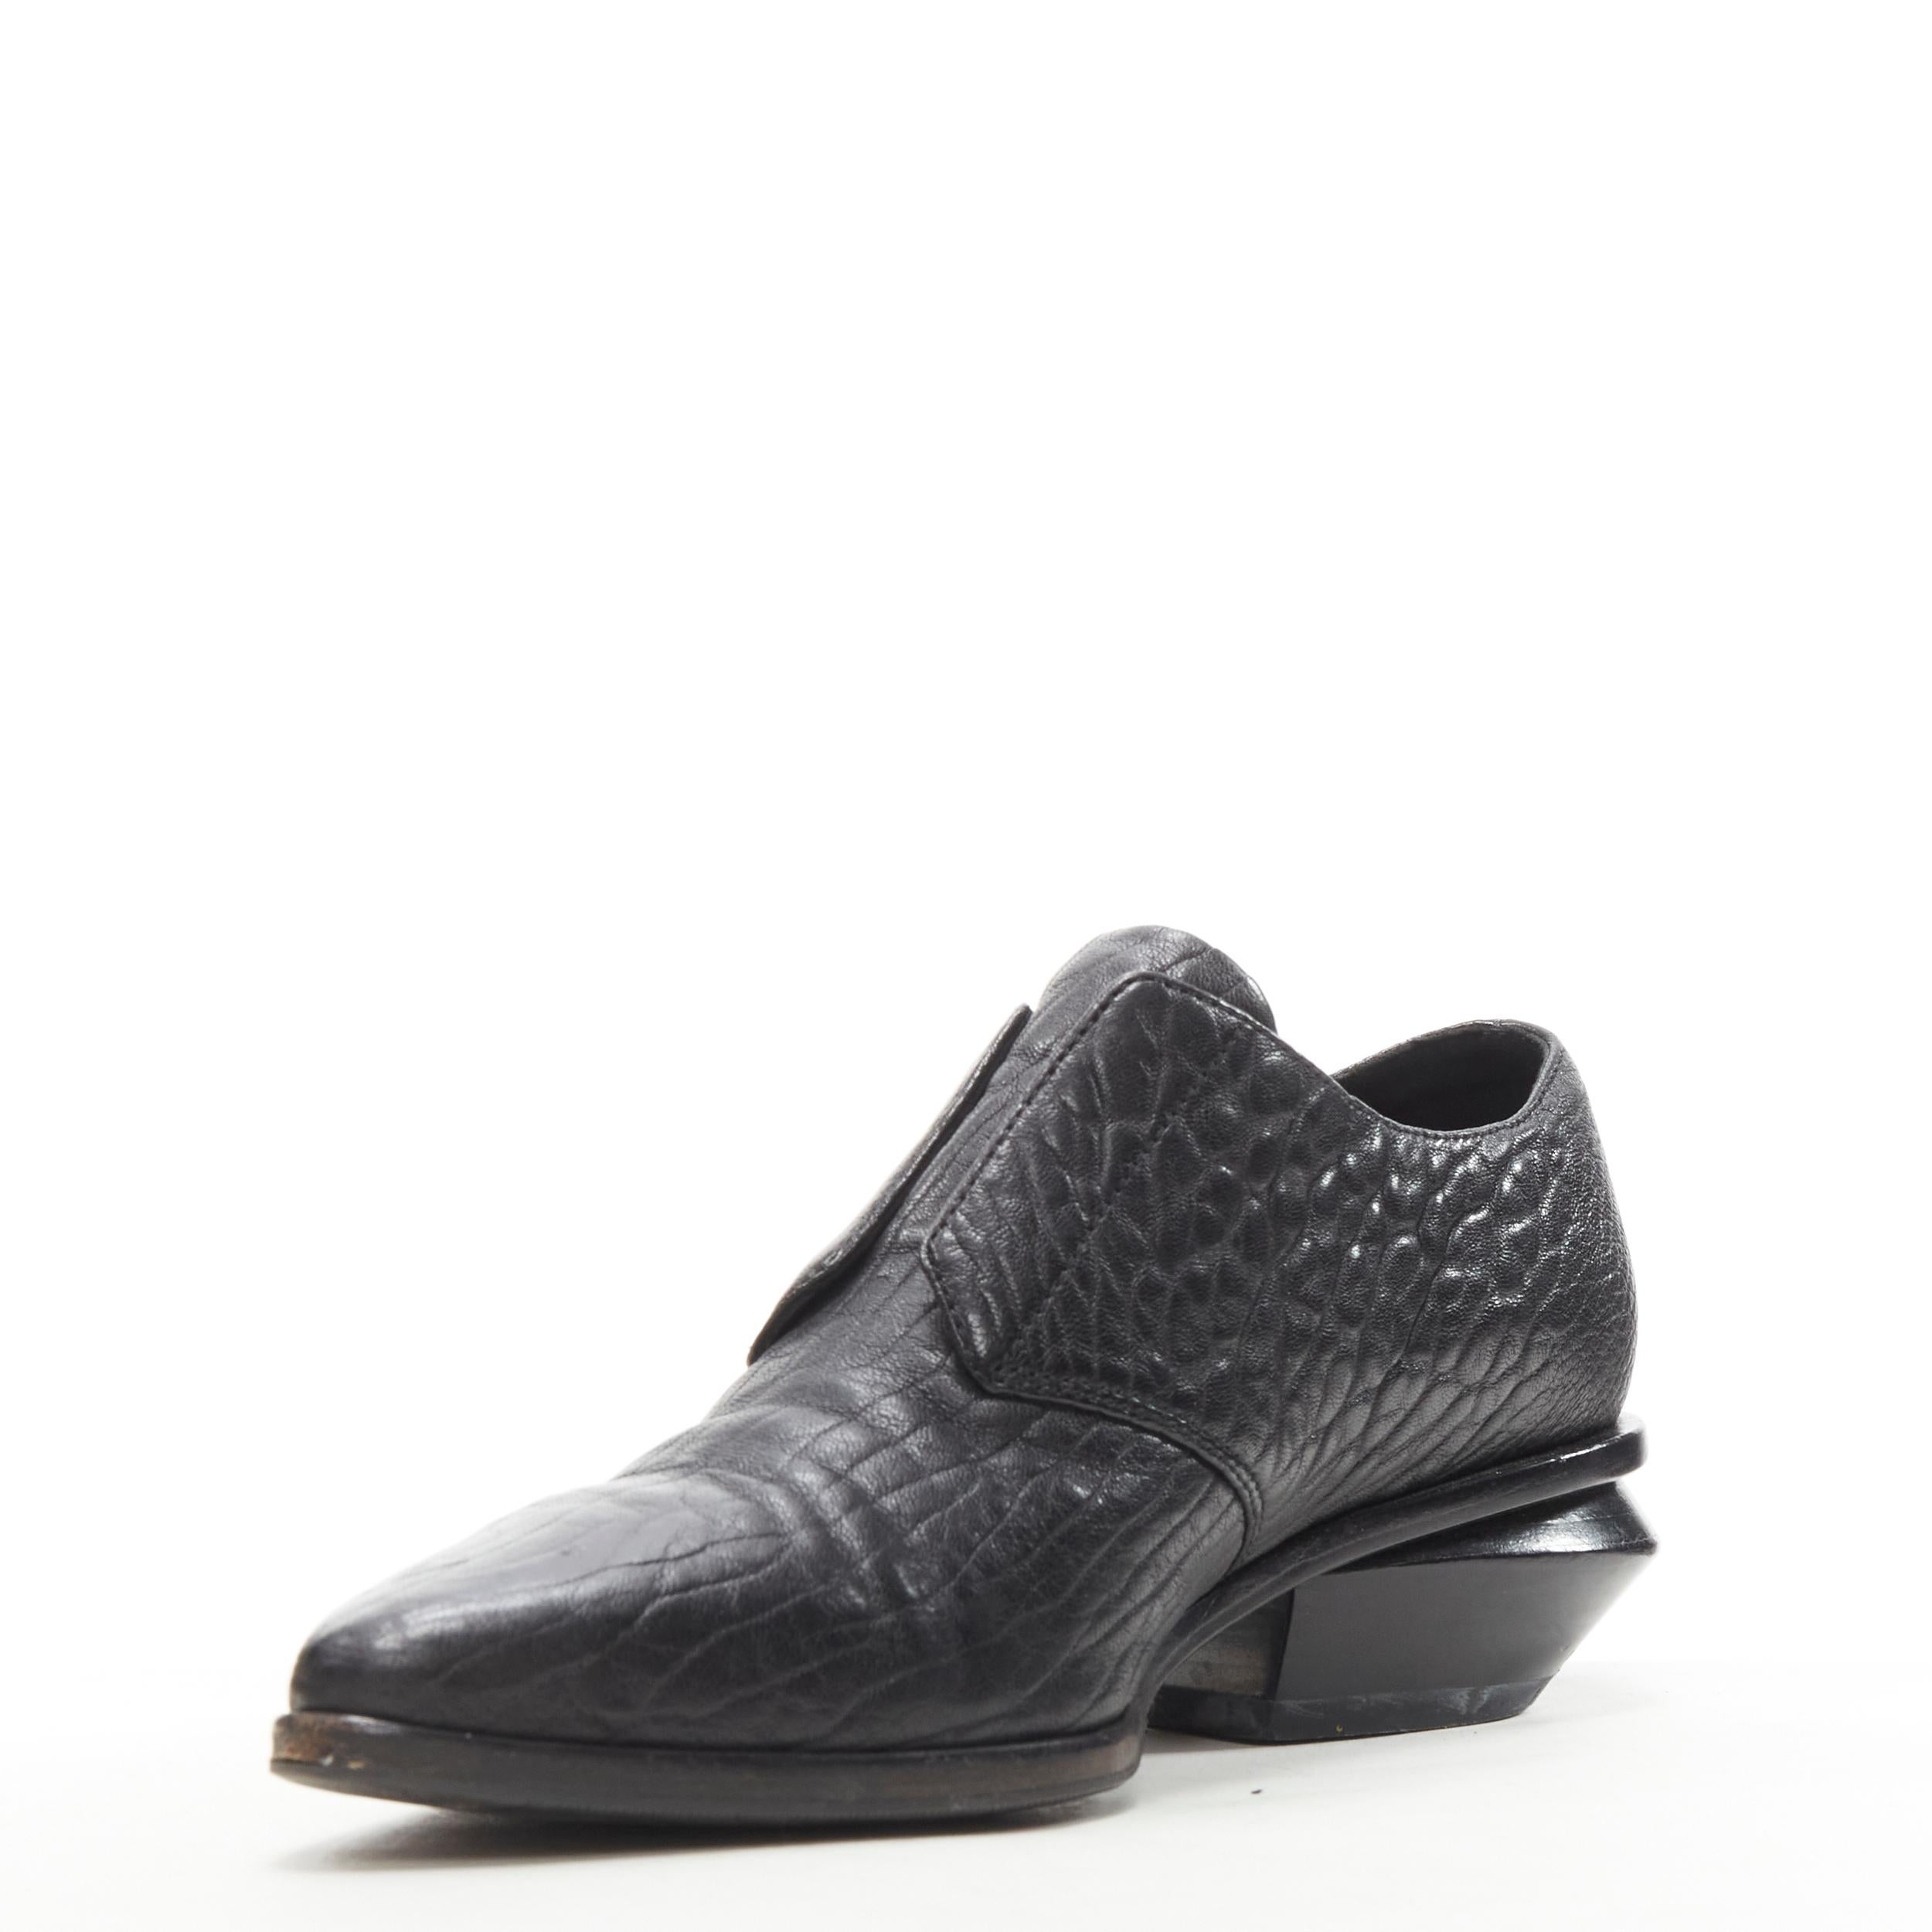 Black ALEXANDER WANG Ines Oxford black leather laceless brogue EU37 For Sale